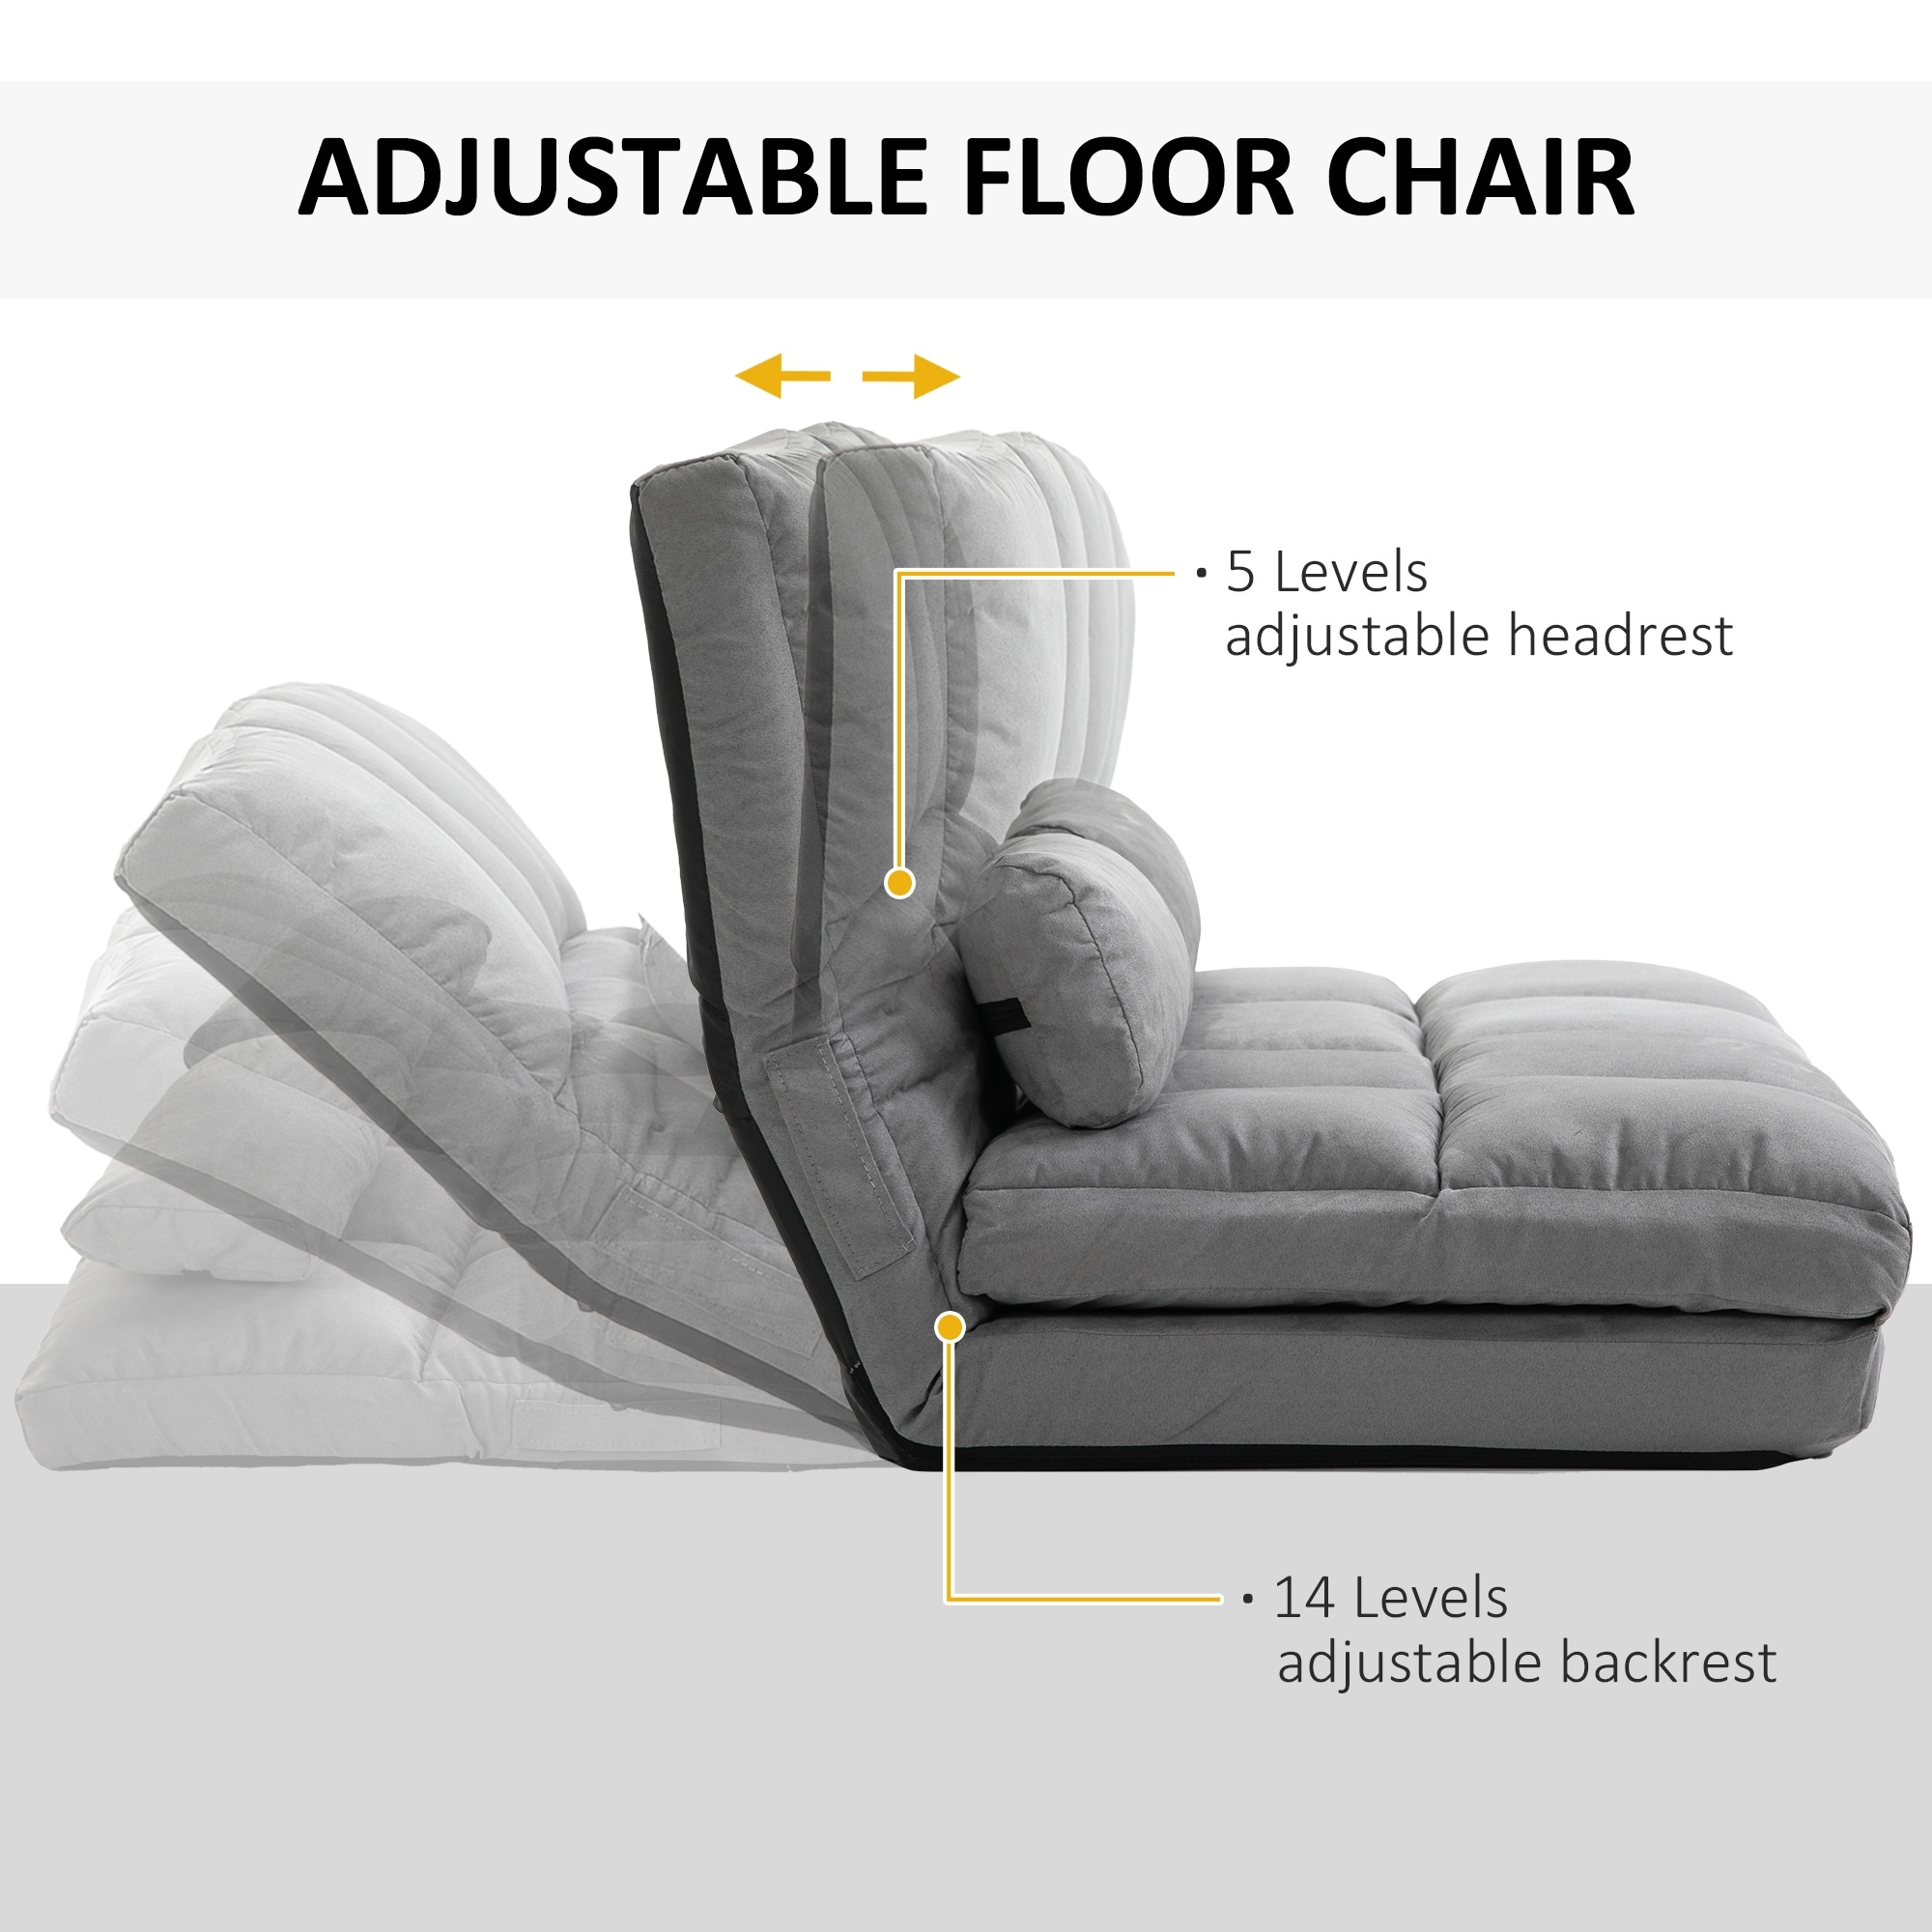 https://ak1.ostkcdn.com/images/products/is/images/direct/2e0940089fb64069b89ad71df89caf2ae92dc367/HOMCOM-Convertible-Floor-Sofa-with-7-Position-Adjustable-Backrest%2C-Thick-Padding%2C-Metal-Frame-and-2-Pillows.jpg